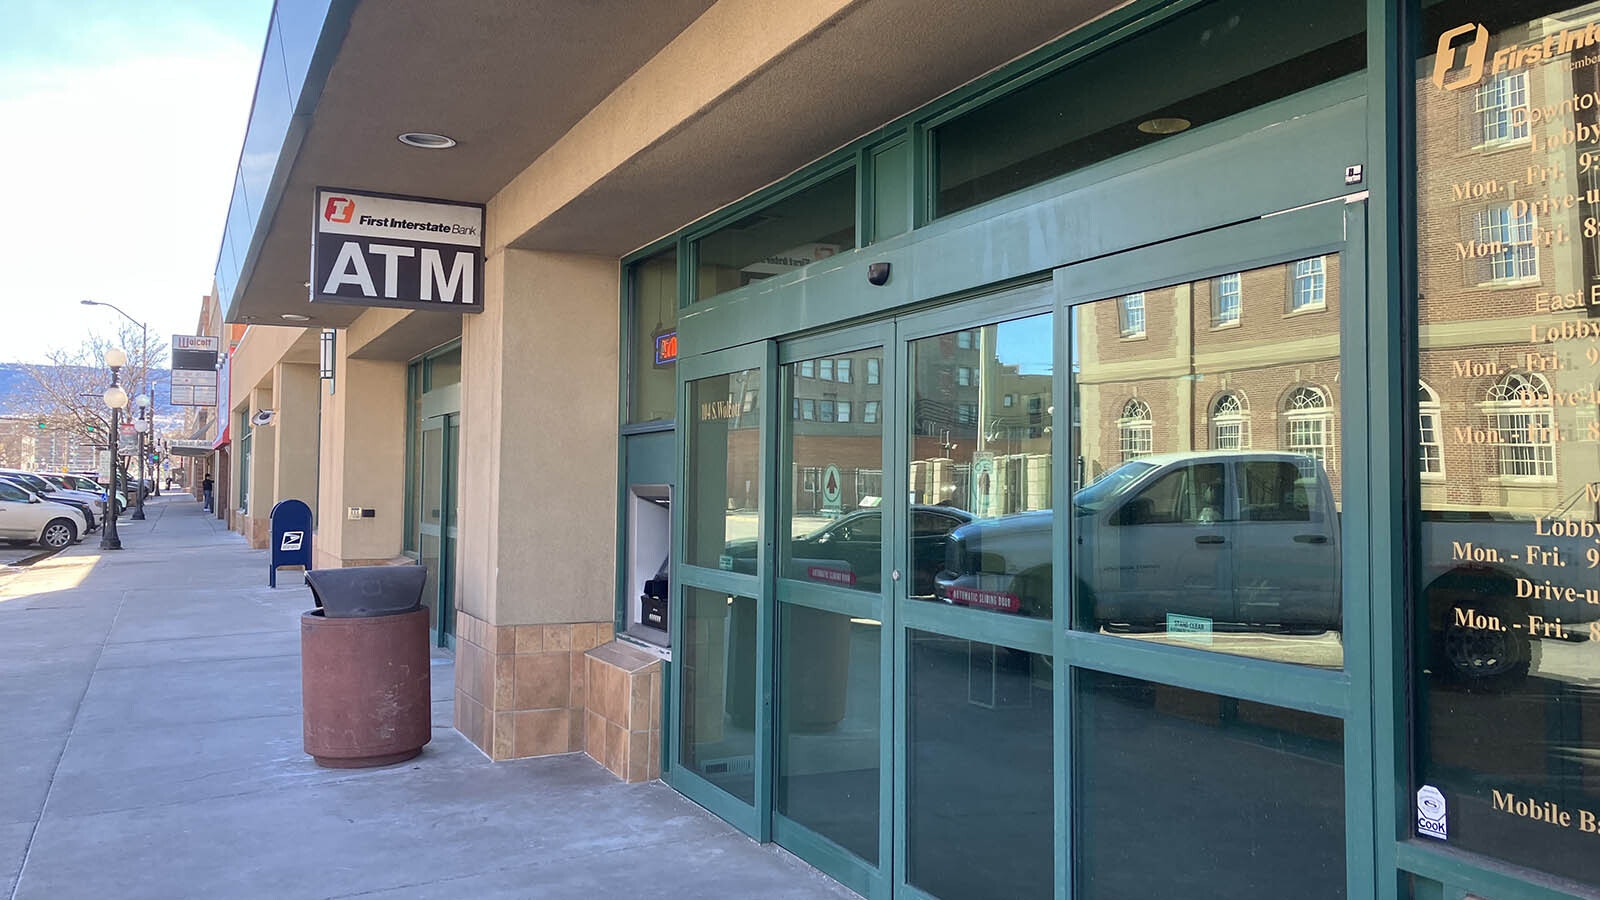 The eight-story First Interstate Bank building sale could provide an opportunity to attract an out-of-state corporate office, according to commercial real estate agent Chuck Hawley.